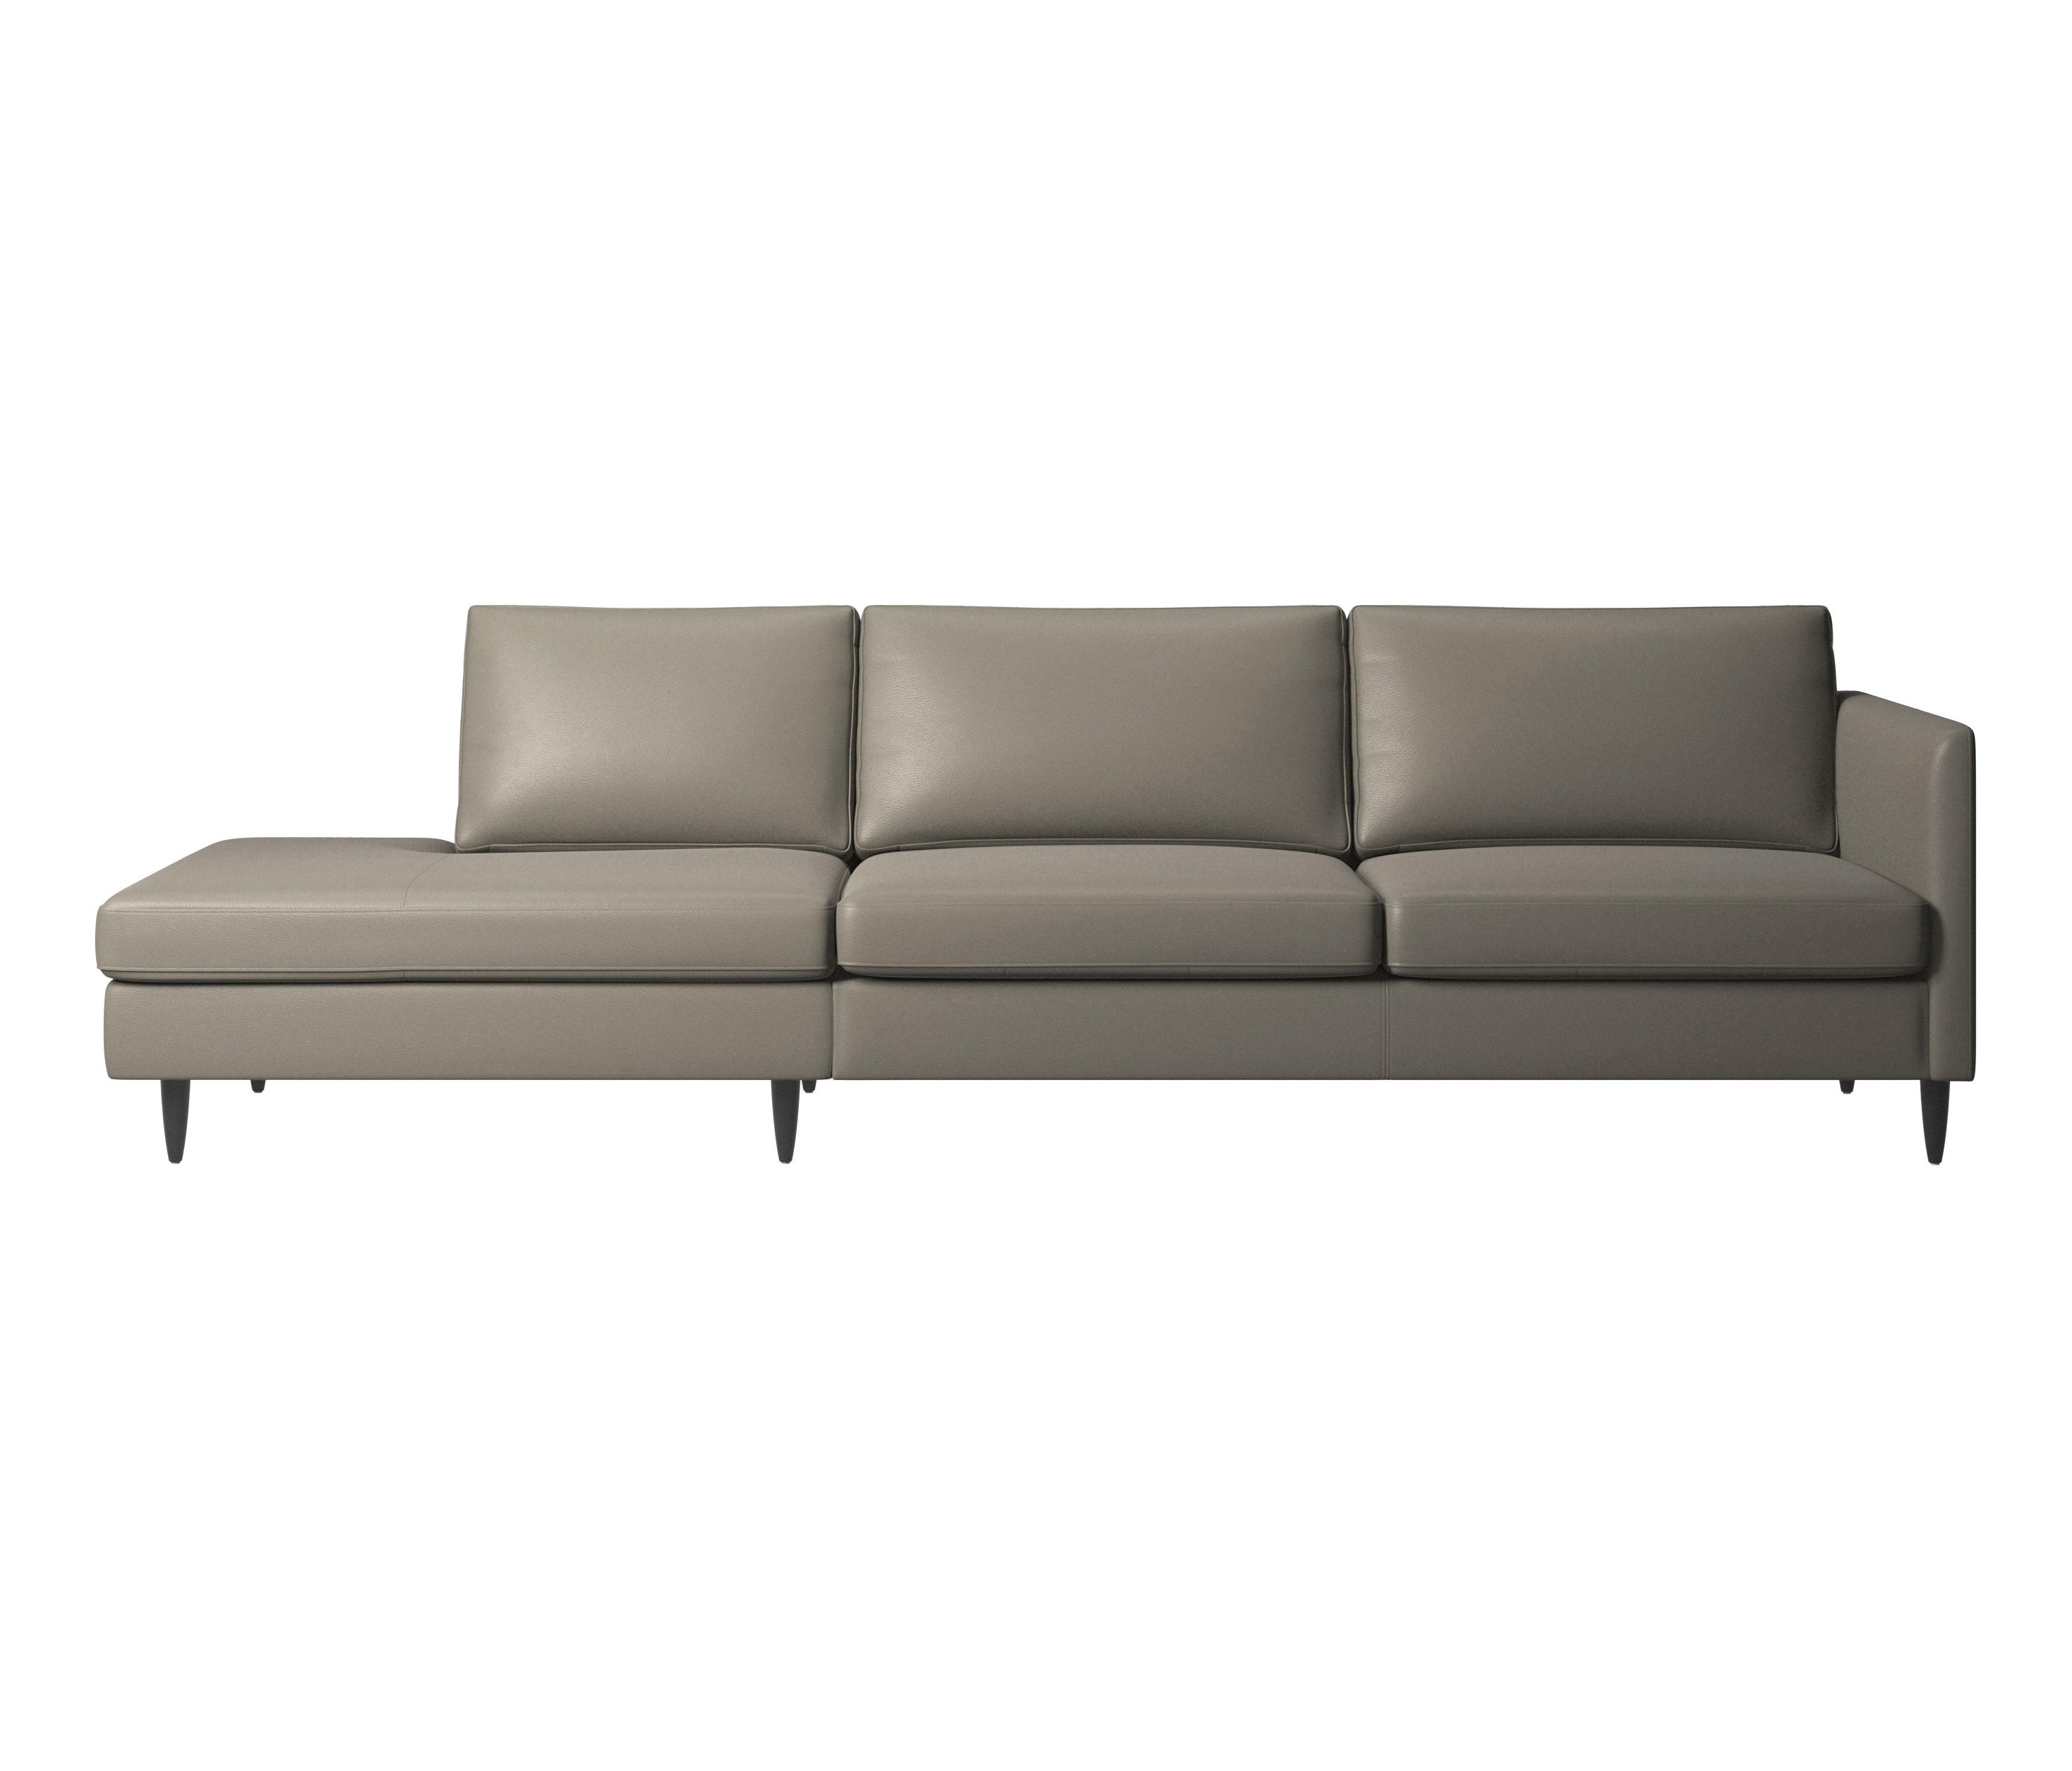 Indivi Sofa with lounging unit | Architonic